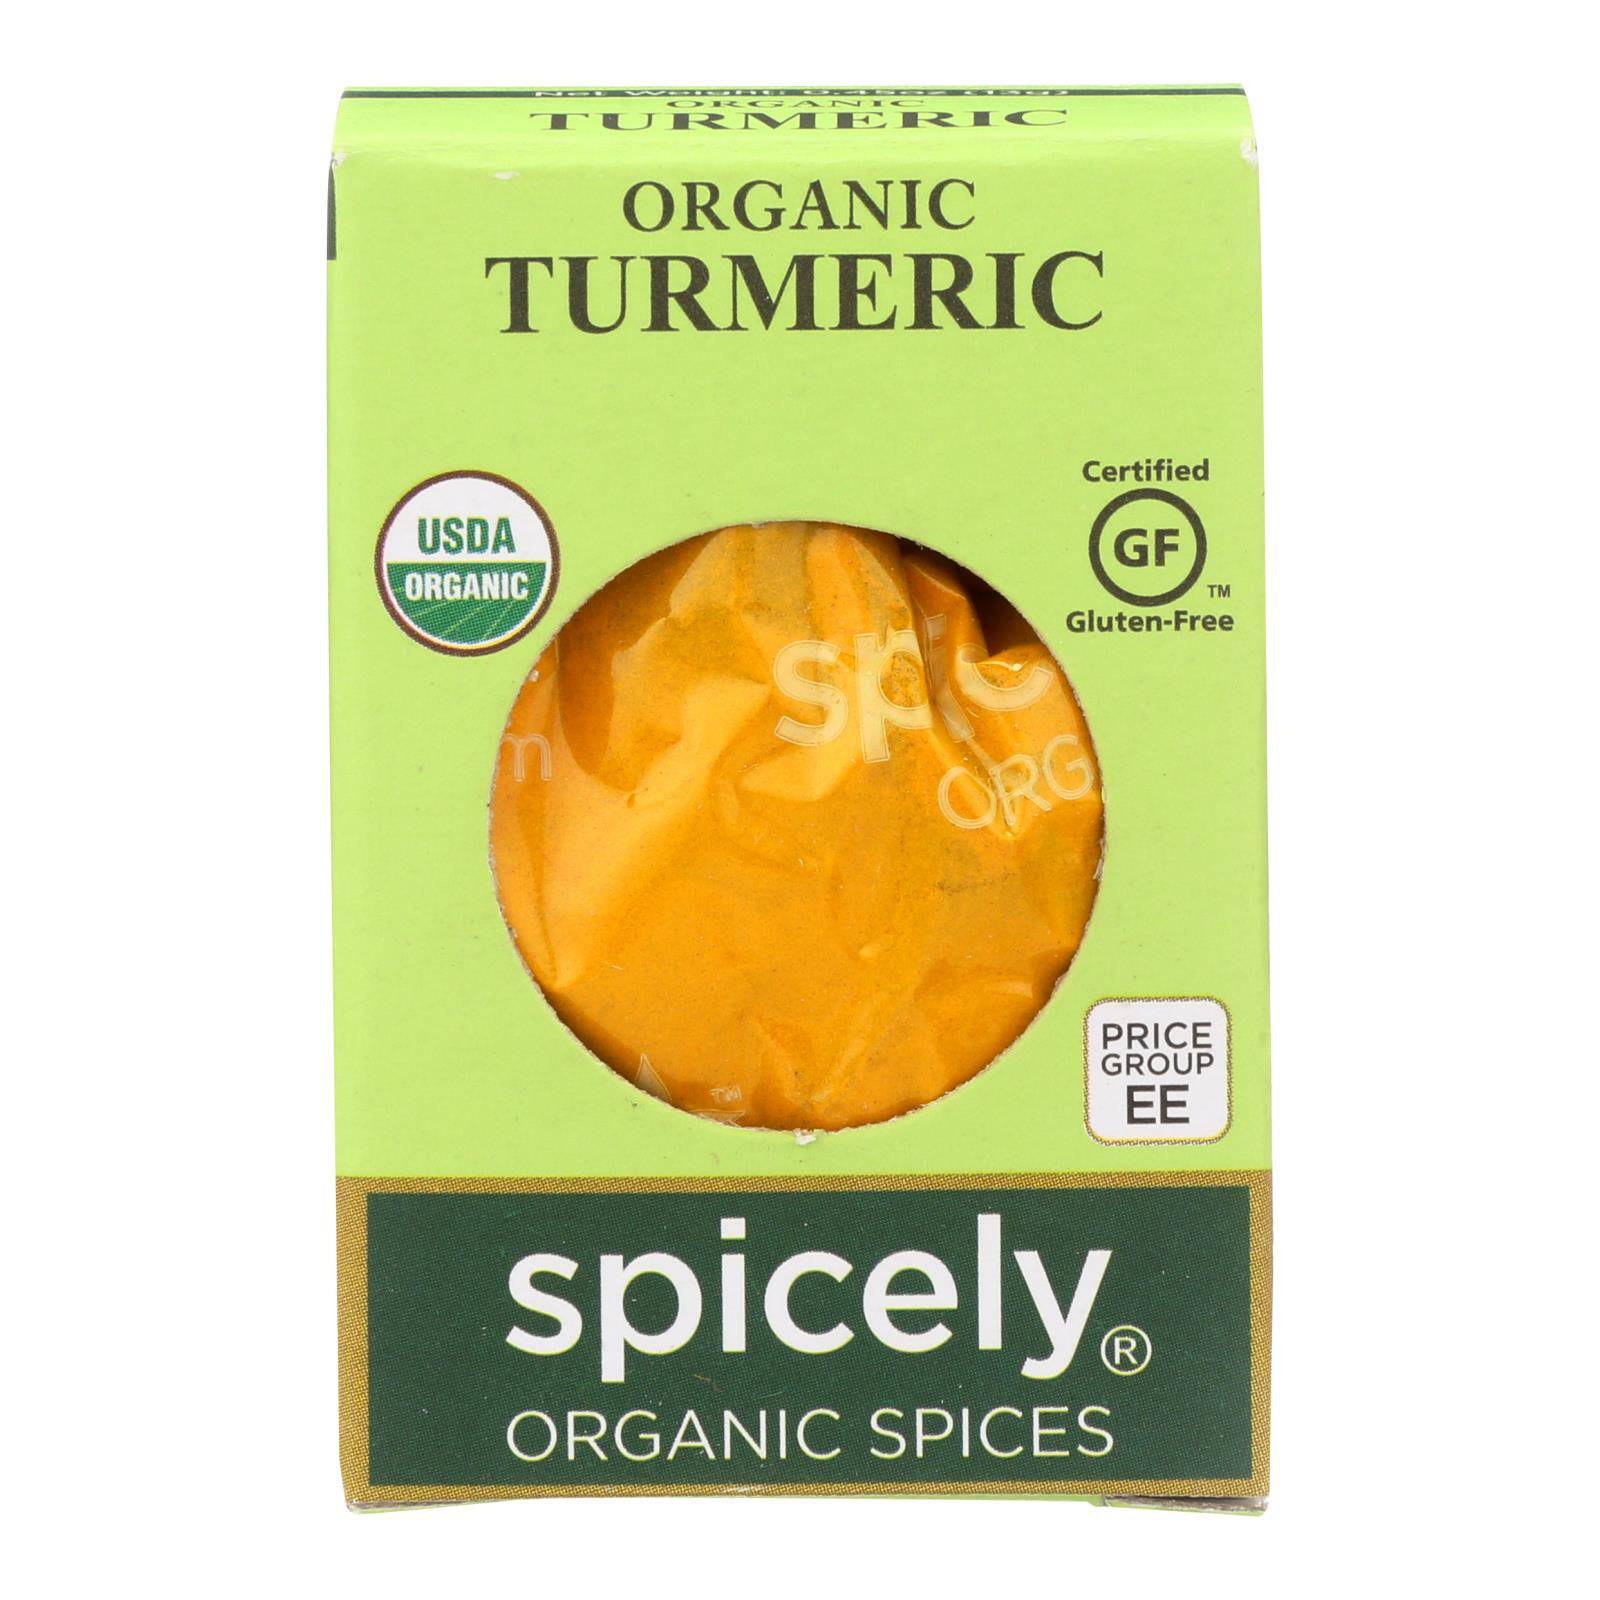 Buy Spicely Organics - Organic Turmeric - Case Of 6 - 0.45 Oz.  at OnlyNaturals.us